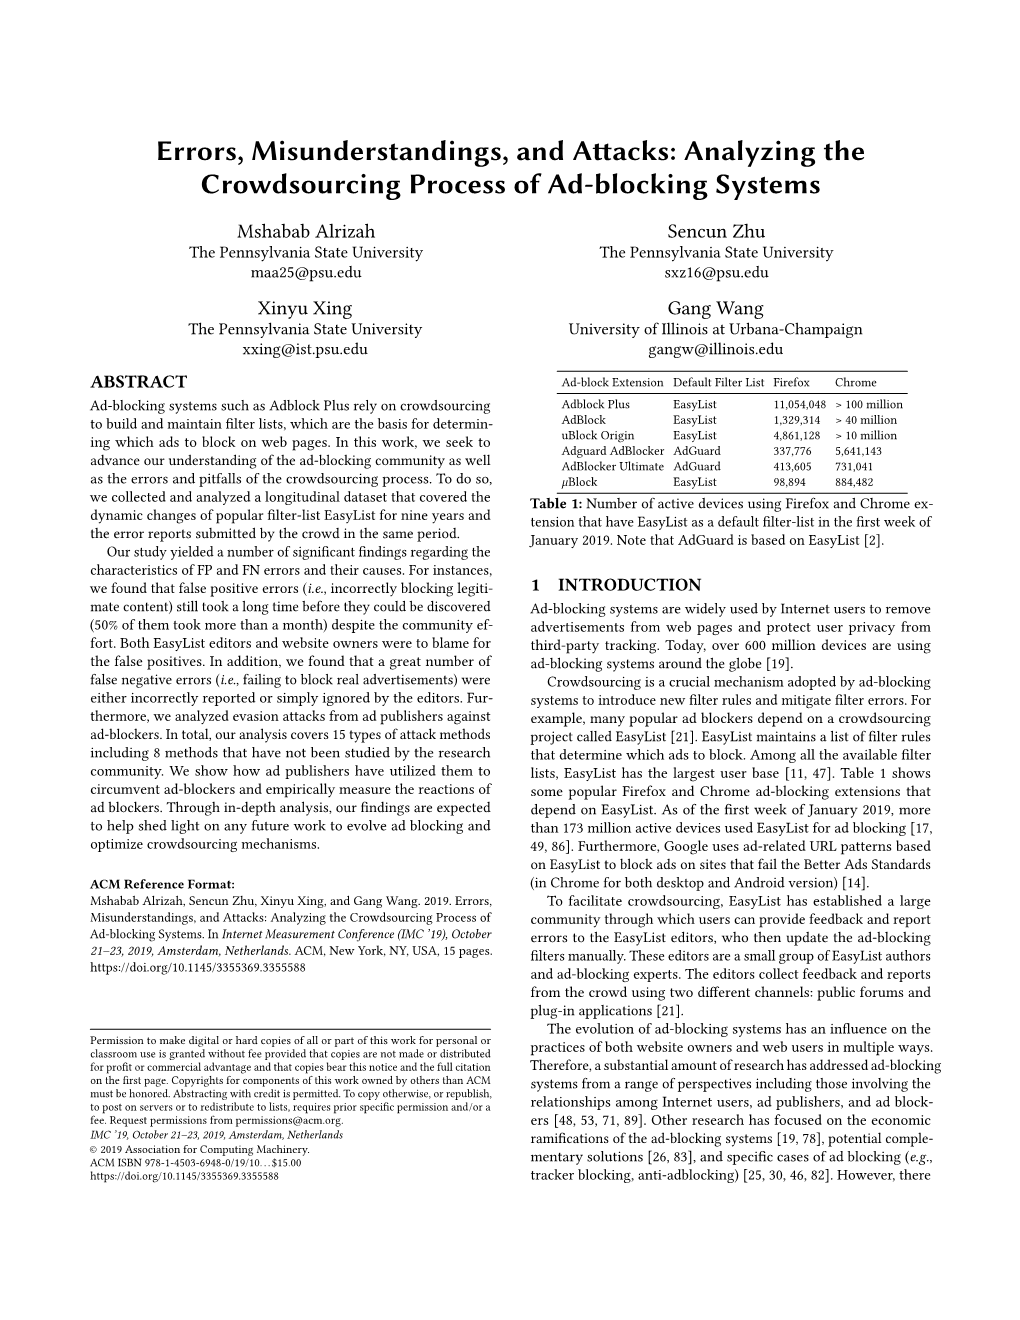 Analyzing the Crowdsourcing Process of Ad-Blocking Systems